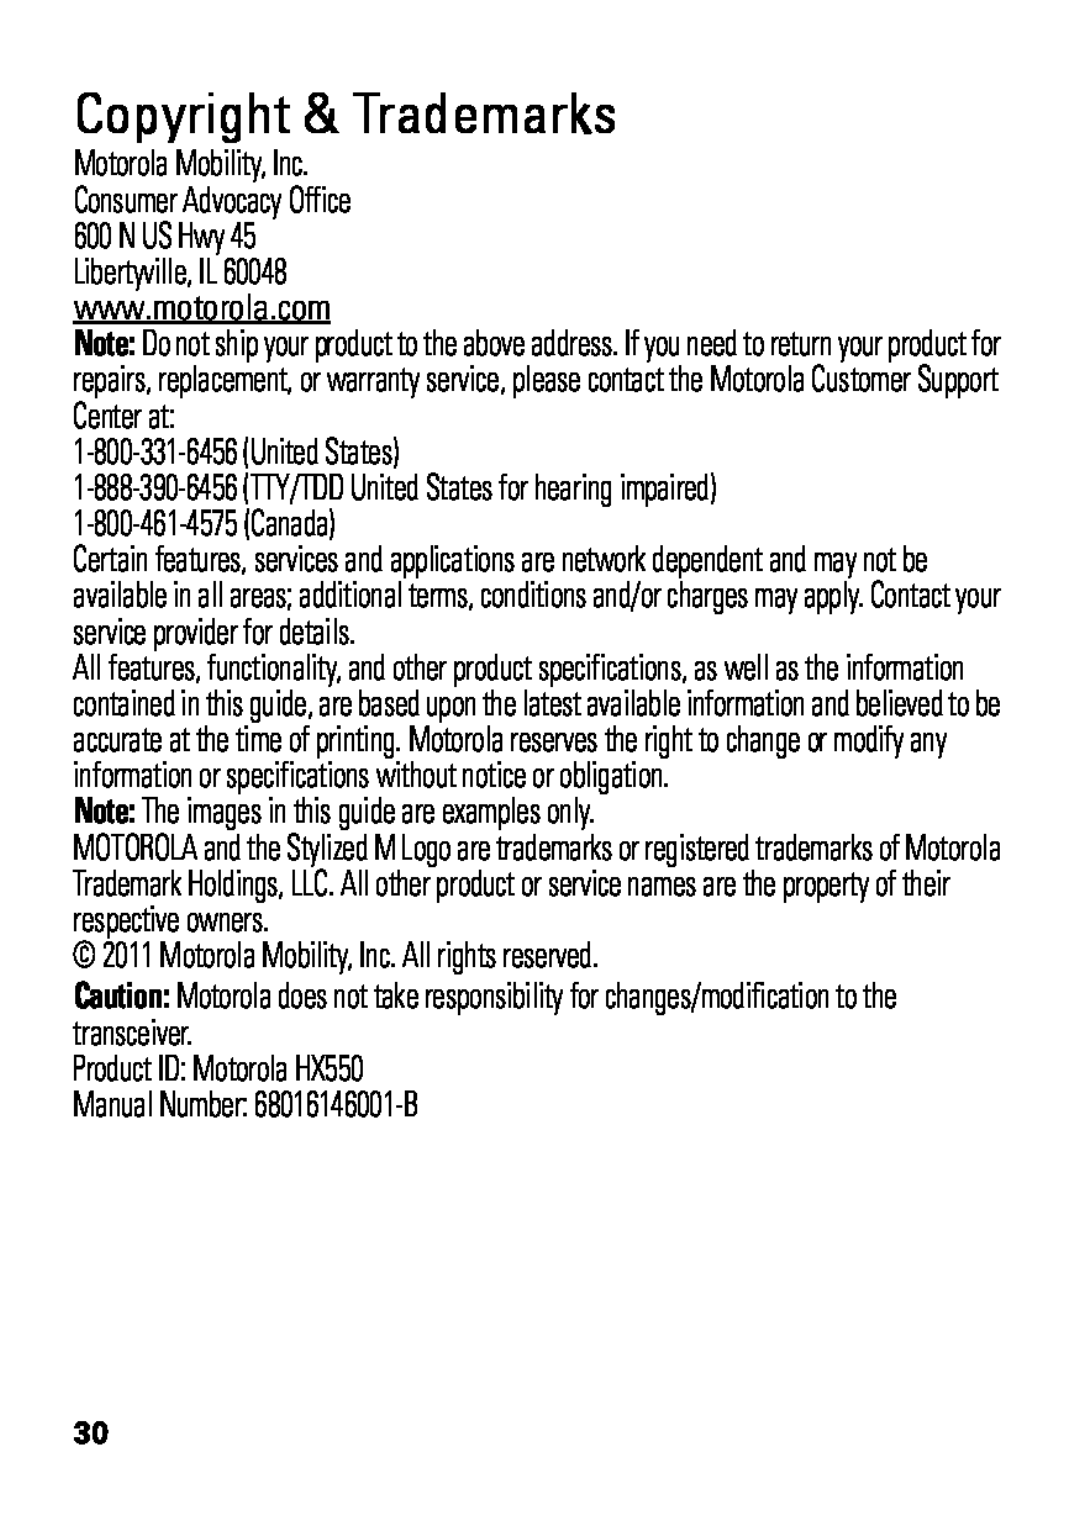 Motorola HX550 manual Copyright & Trademarks, 1-800-331-6456United States, Note: The images in this guide are examples only 